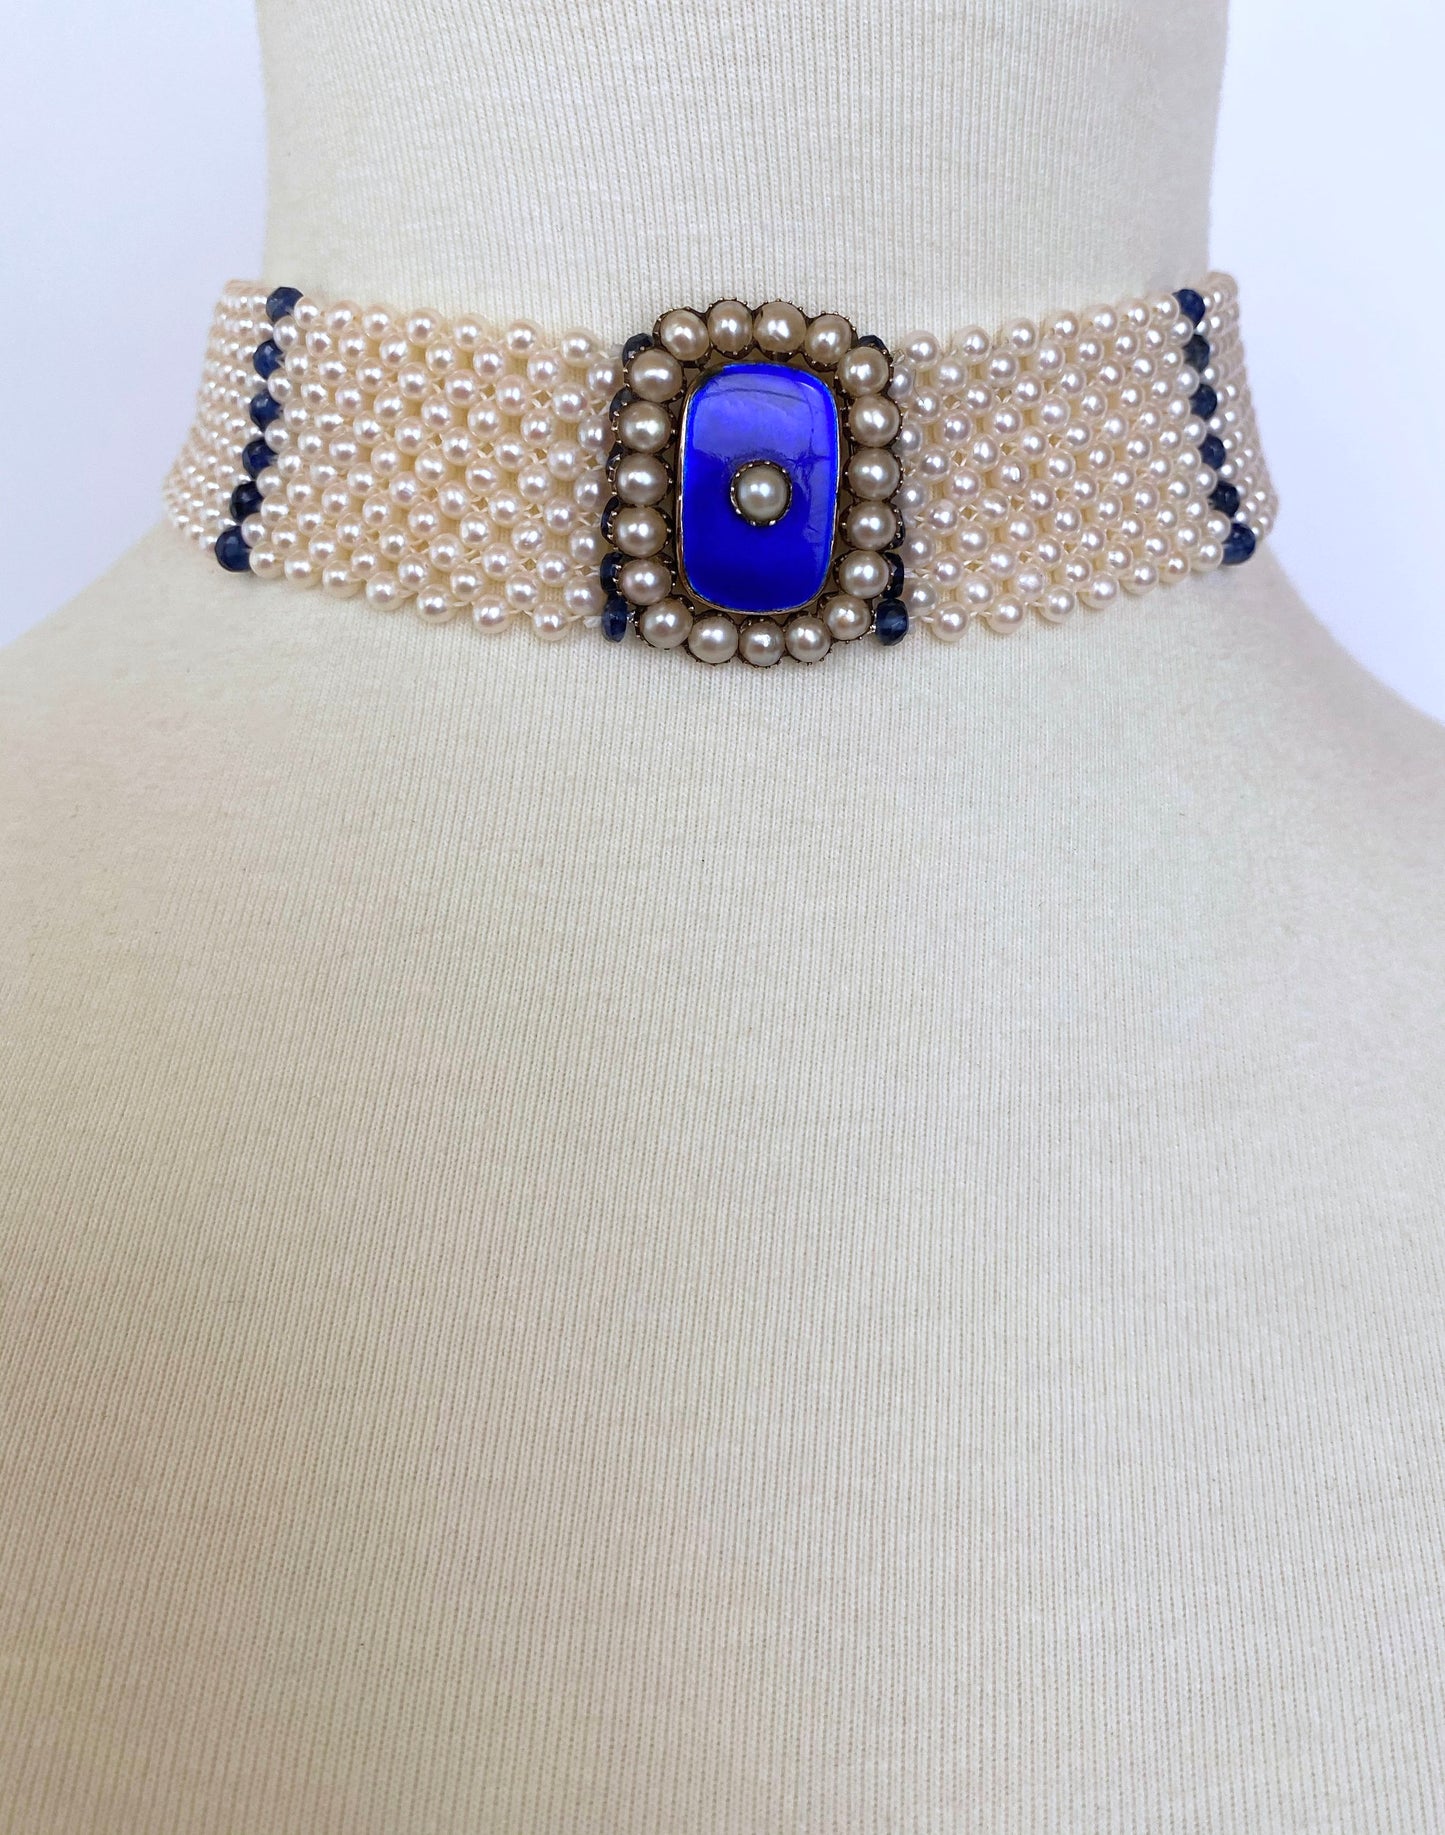 Pearl & Sapphire Choker with Vintage Centerpiece and 14K White Gold